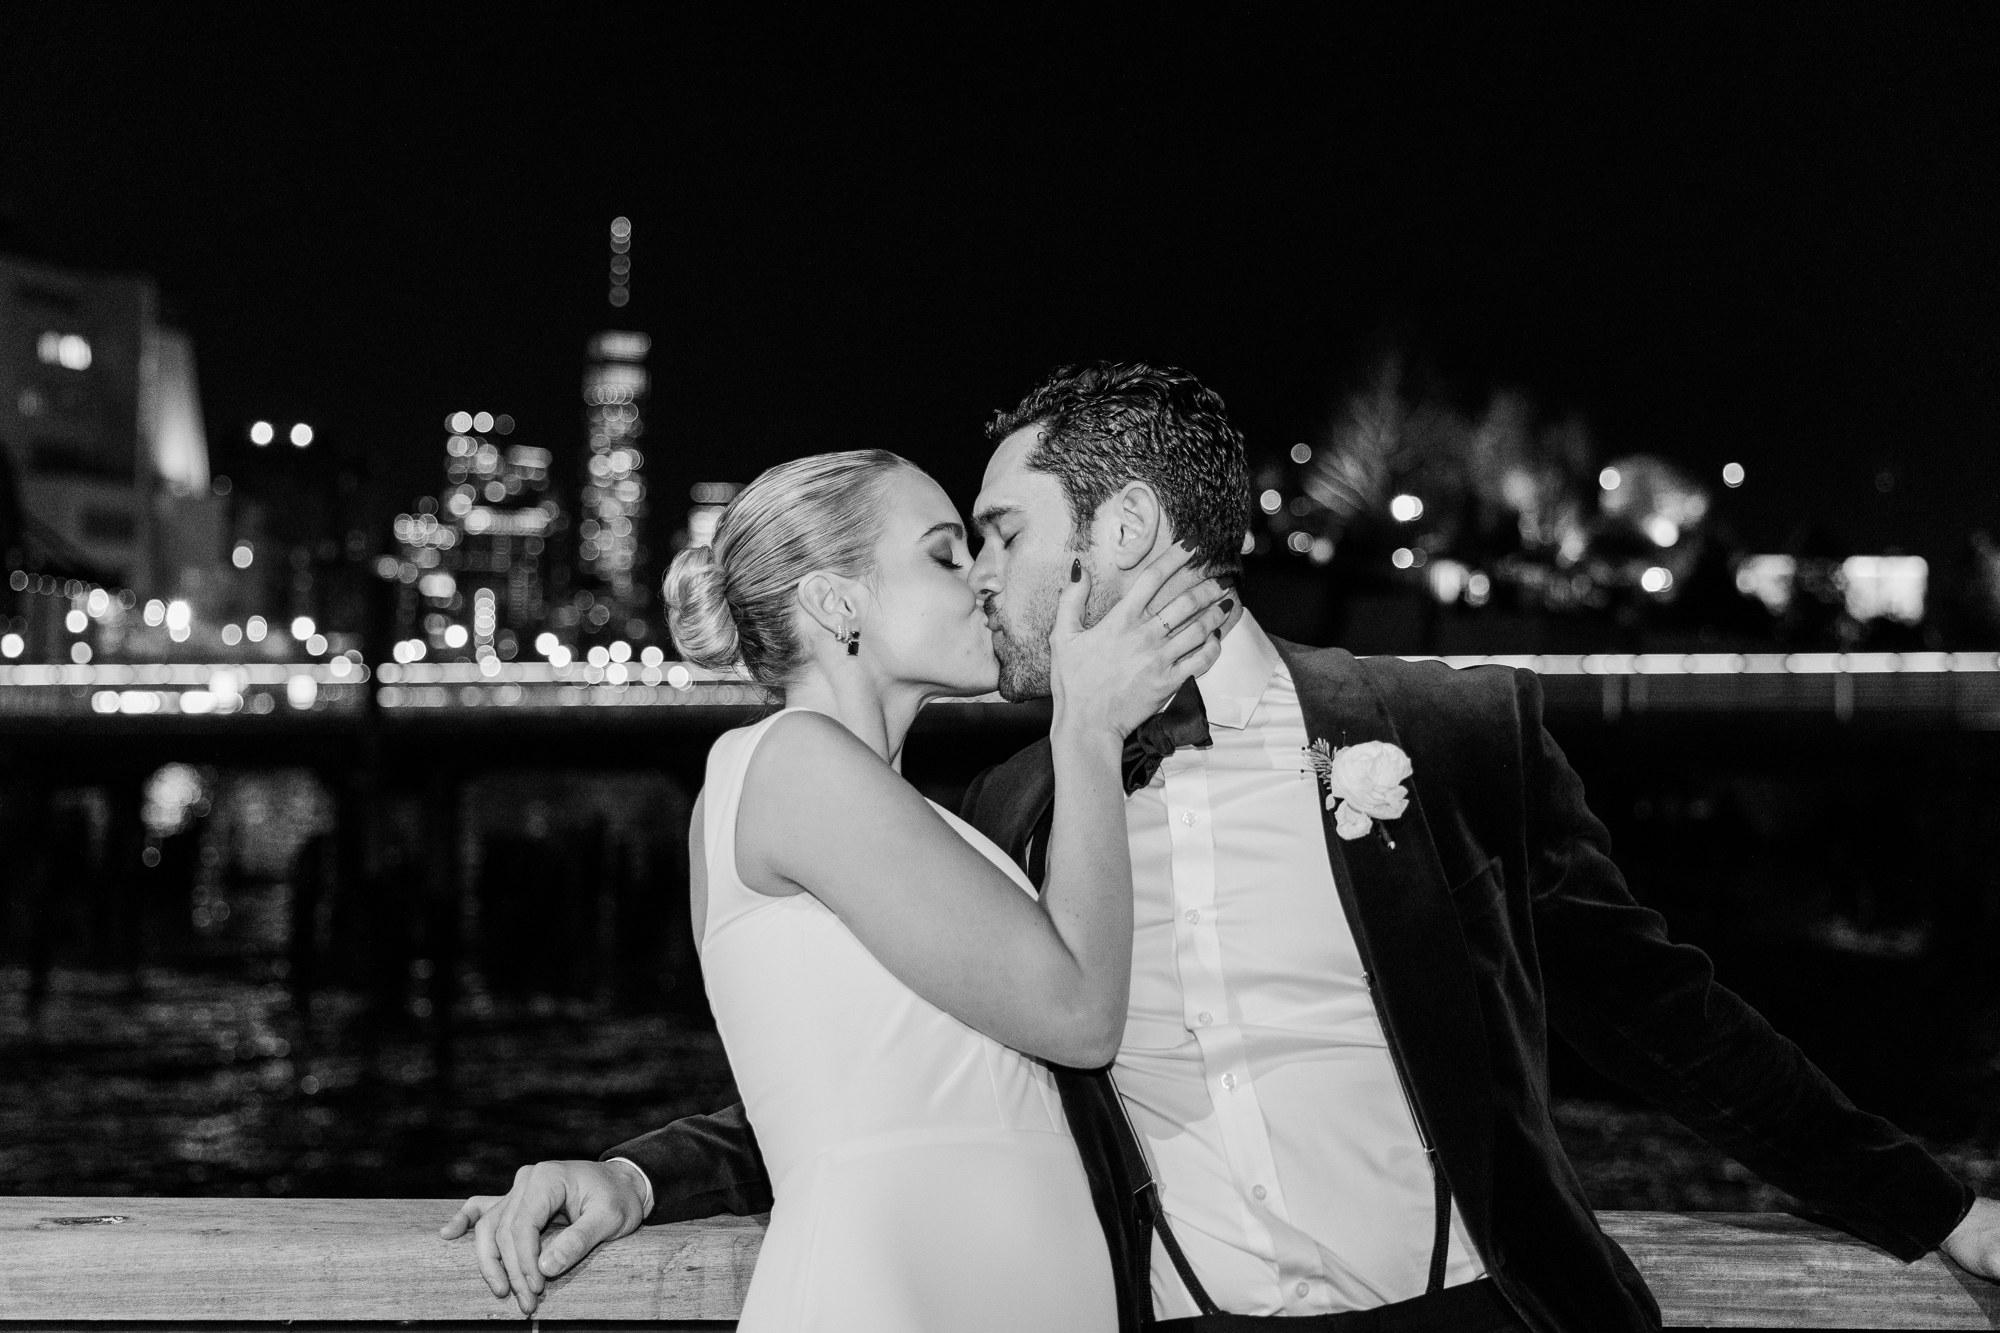 Intimate New York Wedding Photography at City Winery